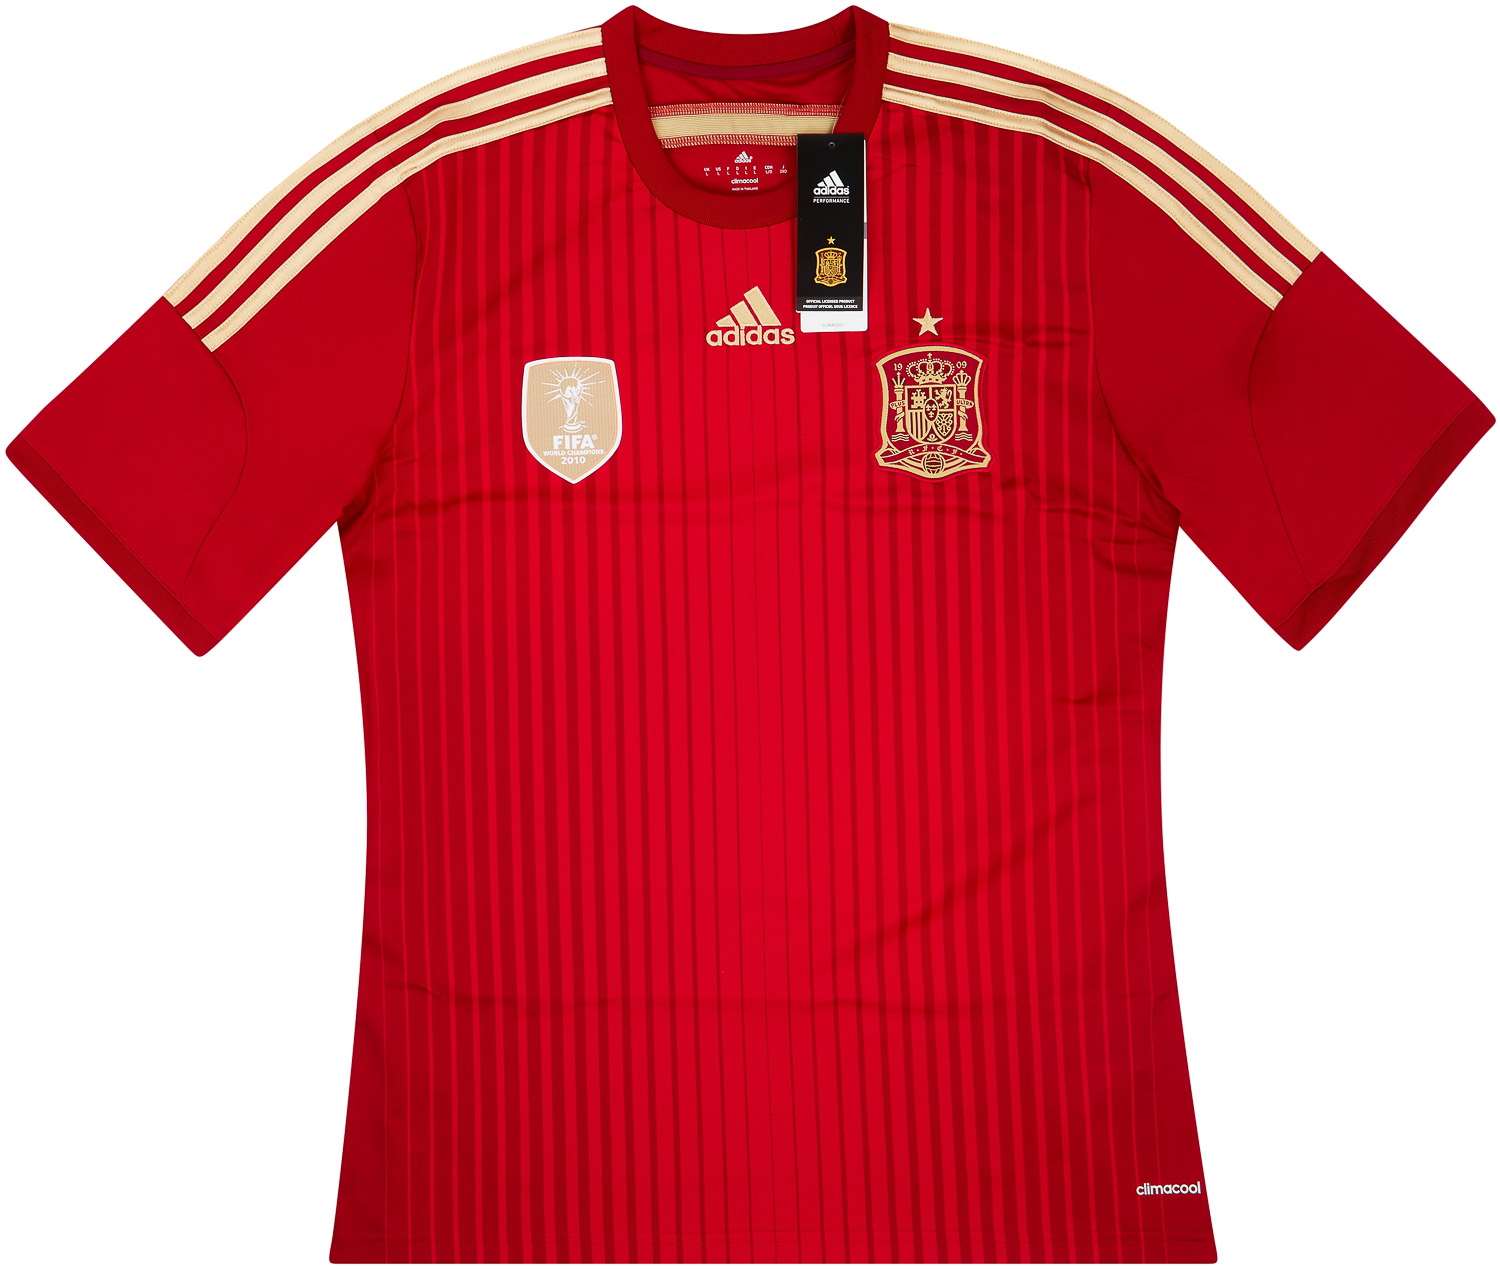 2013-15 Spain Home Shirt *New w/Defects*